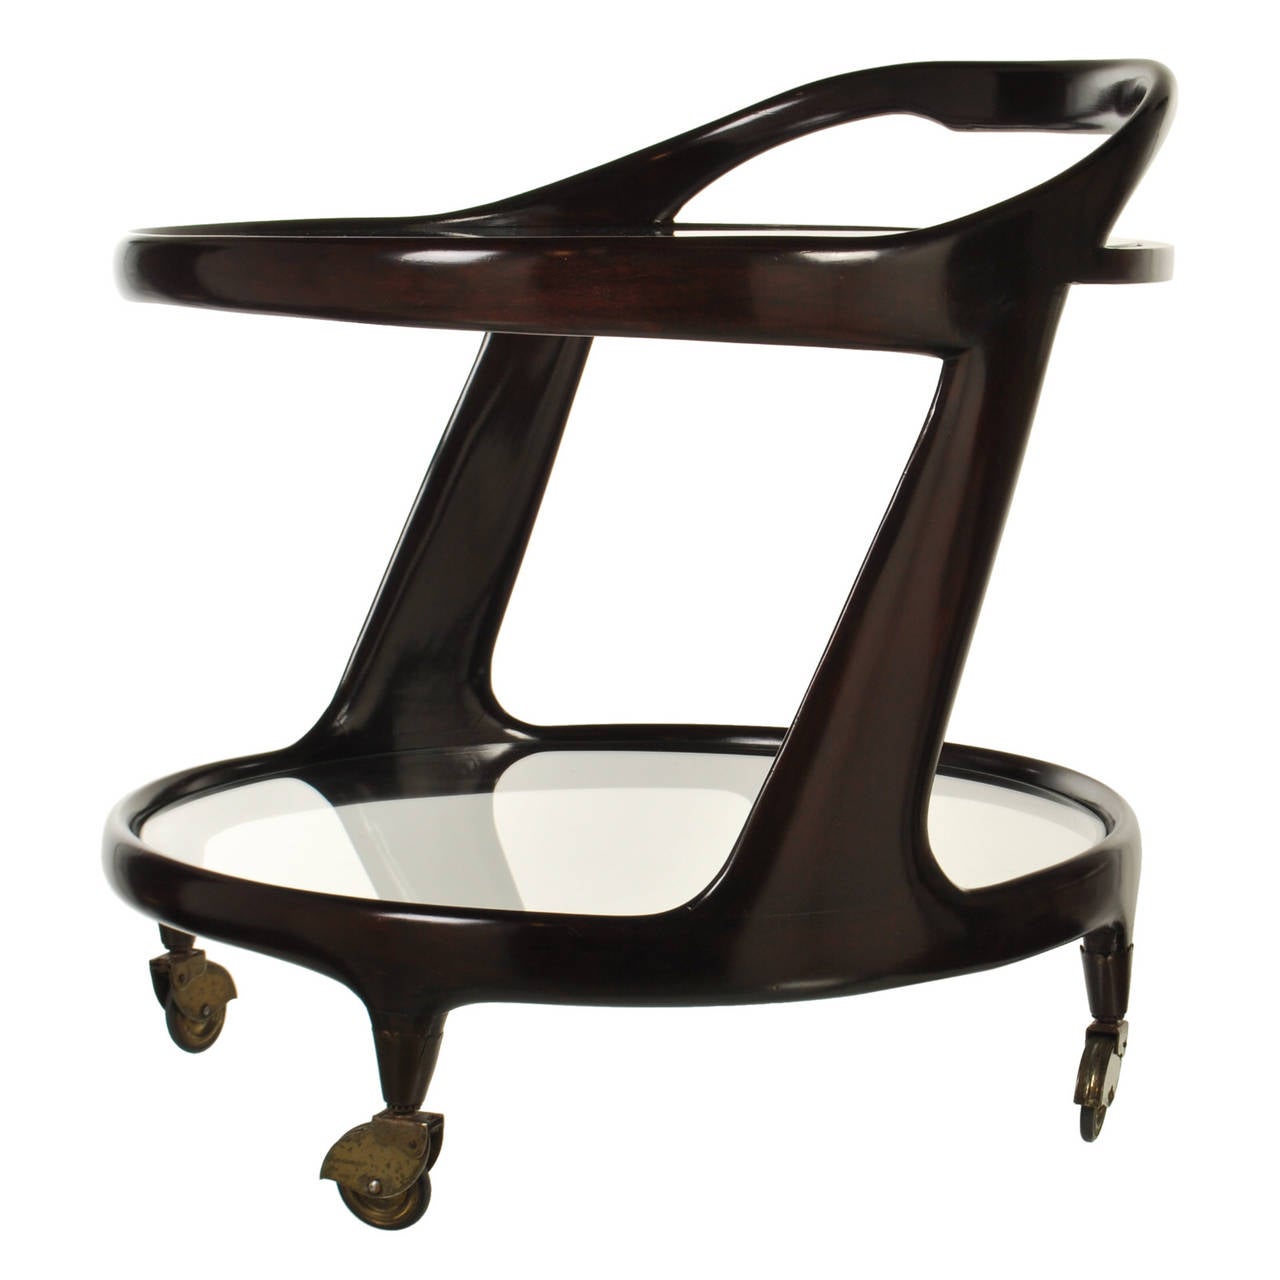 This sexy and stylish mahogany two-tier bar cart is an excellent example of Mid-Century Italian design. It almost has a vintage Space Age look, with its sweeping round handle and angular side supports. The attention to detail is evident from the